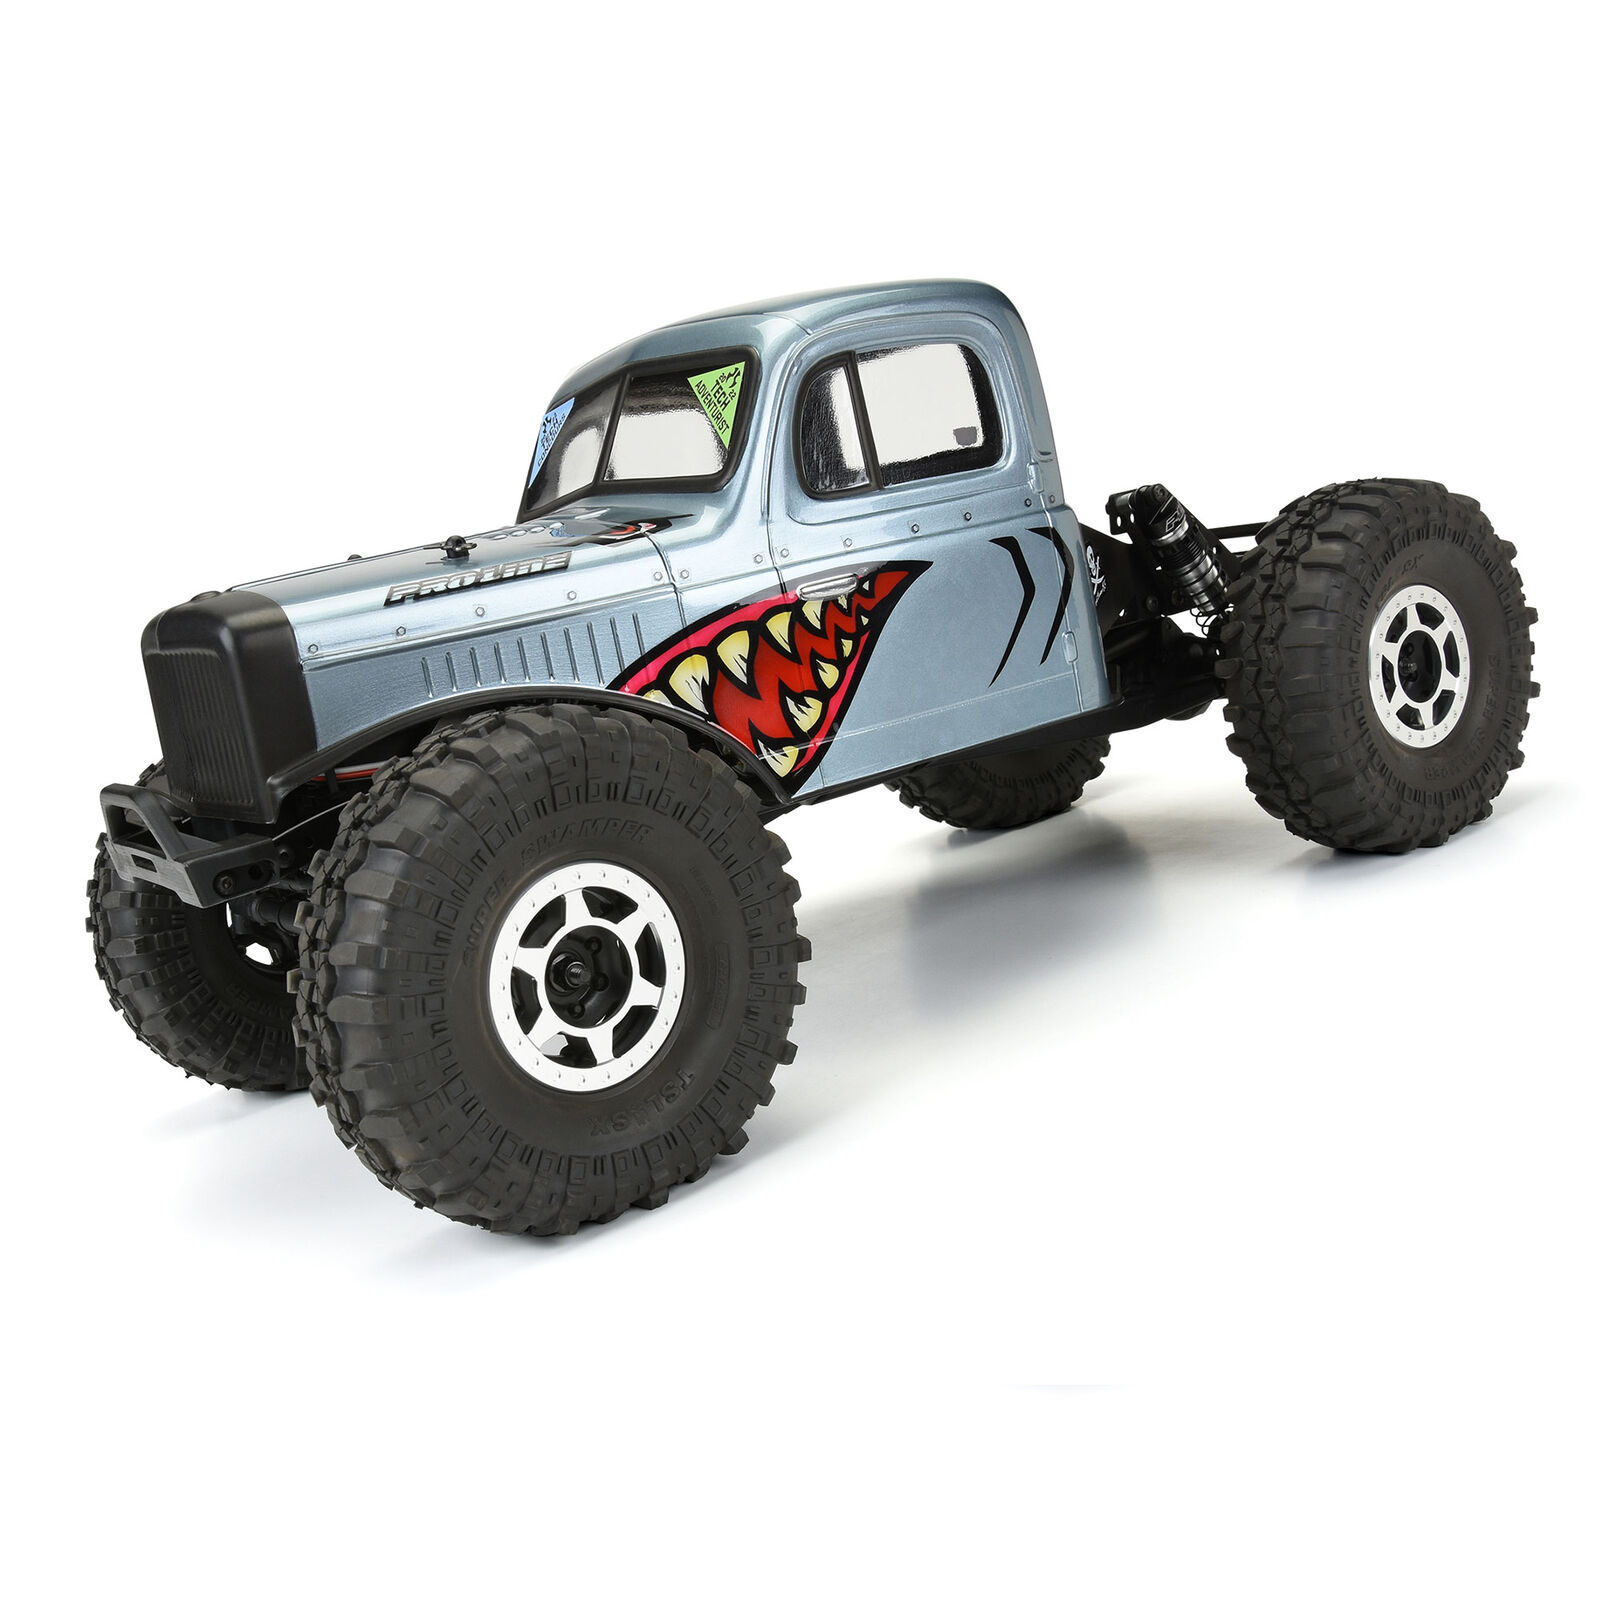 10 super useful stocking stuffers from Pro-Line - RC Driver